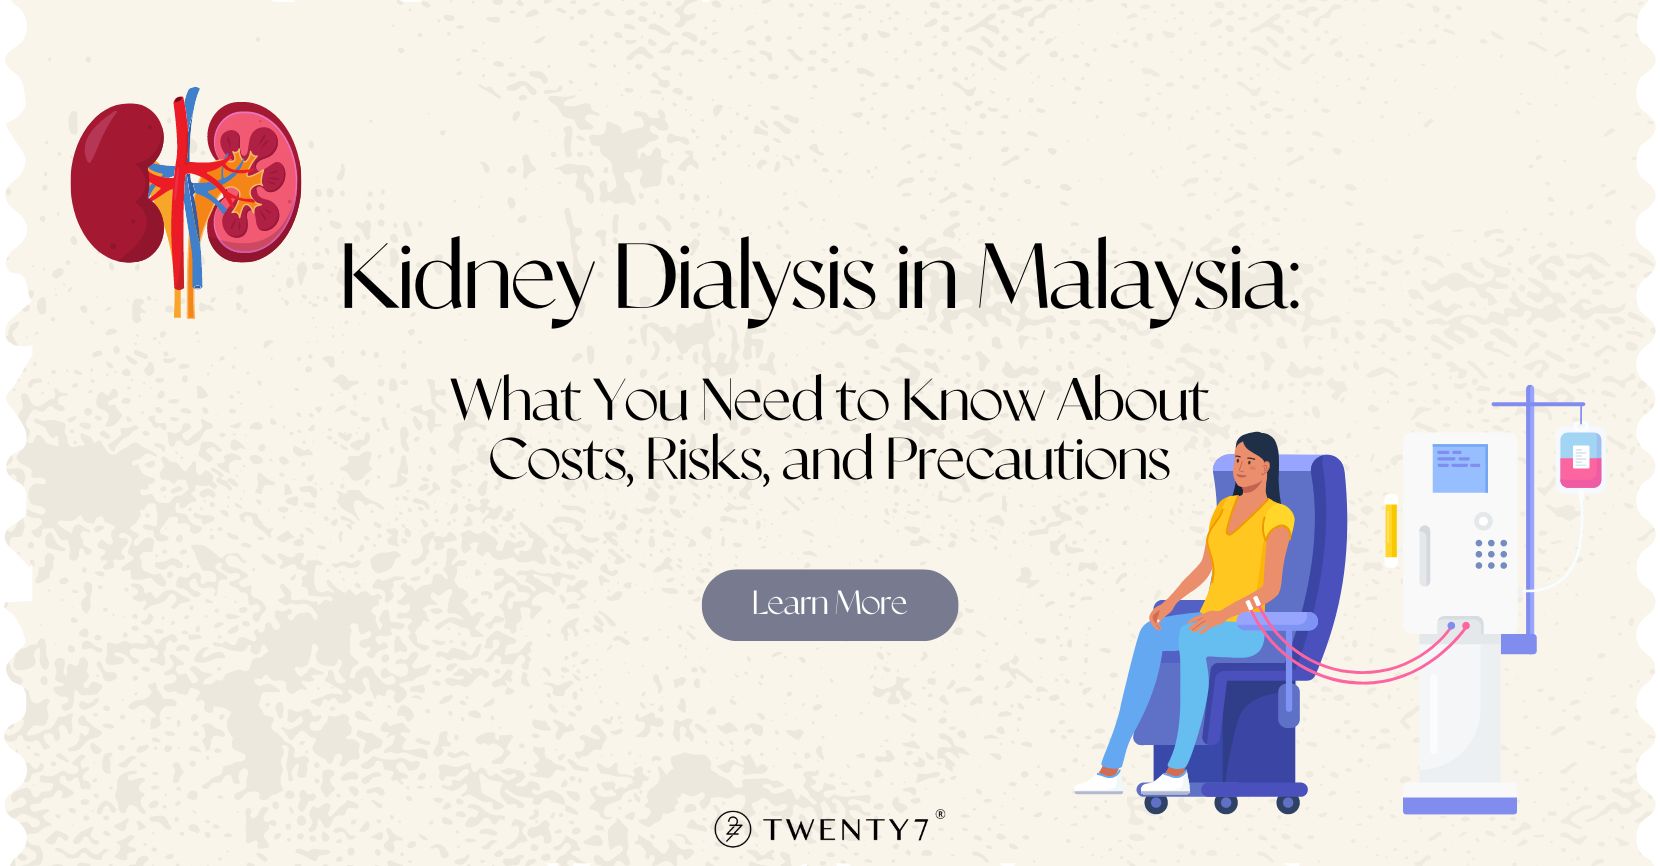 Kidney Dialysis in Malaysia: What You Need to Know About Costs, Risks, and Precautions